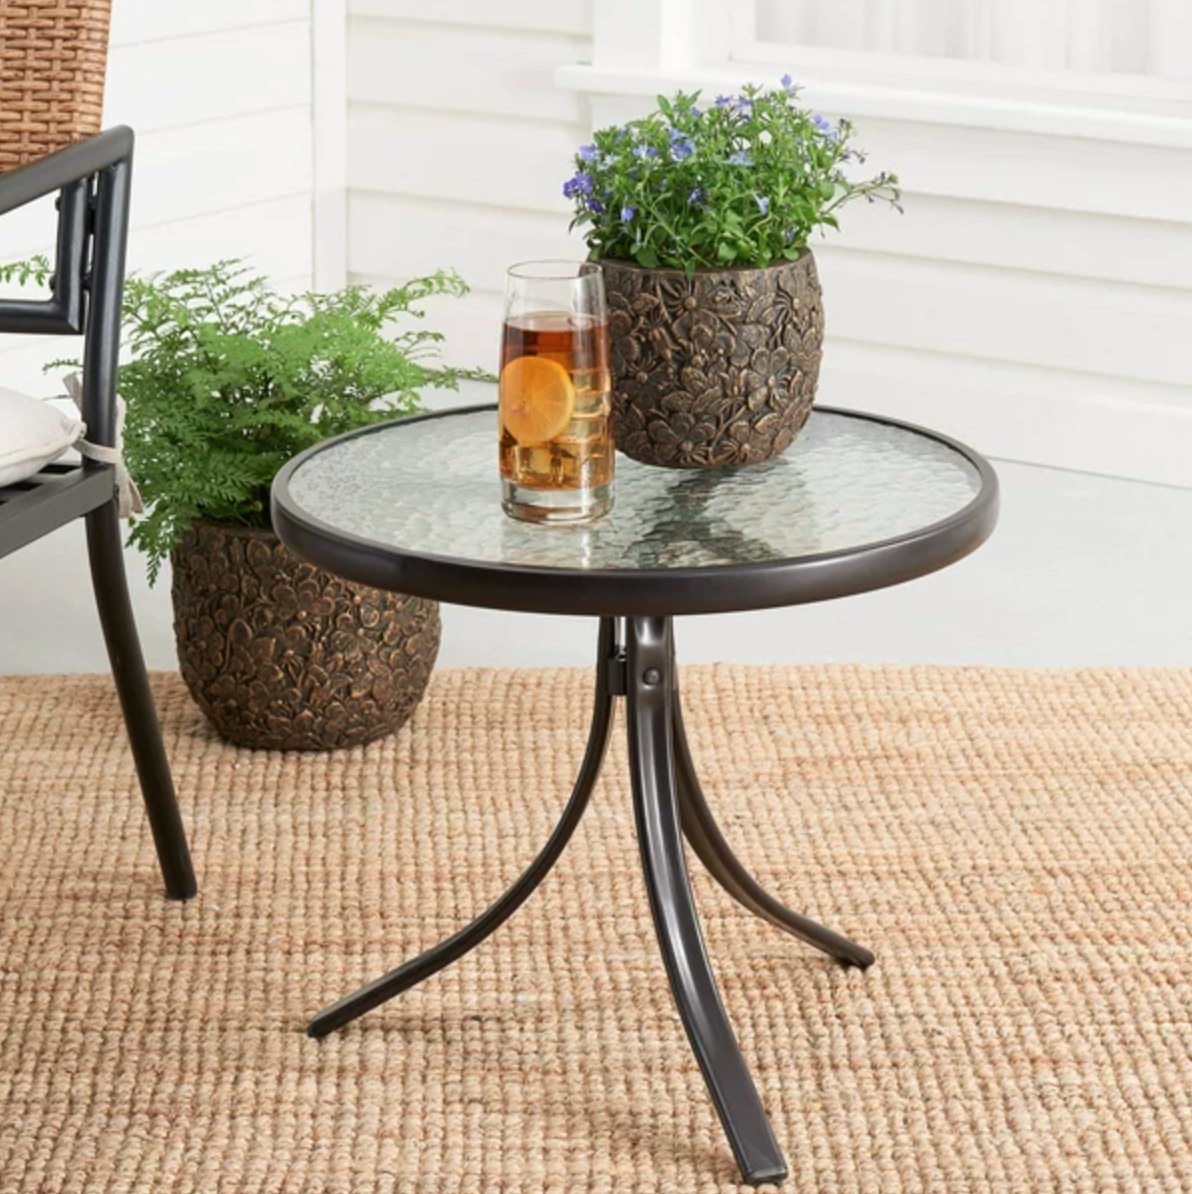 the metal and glass side table in a decorated patio space